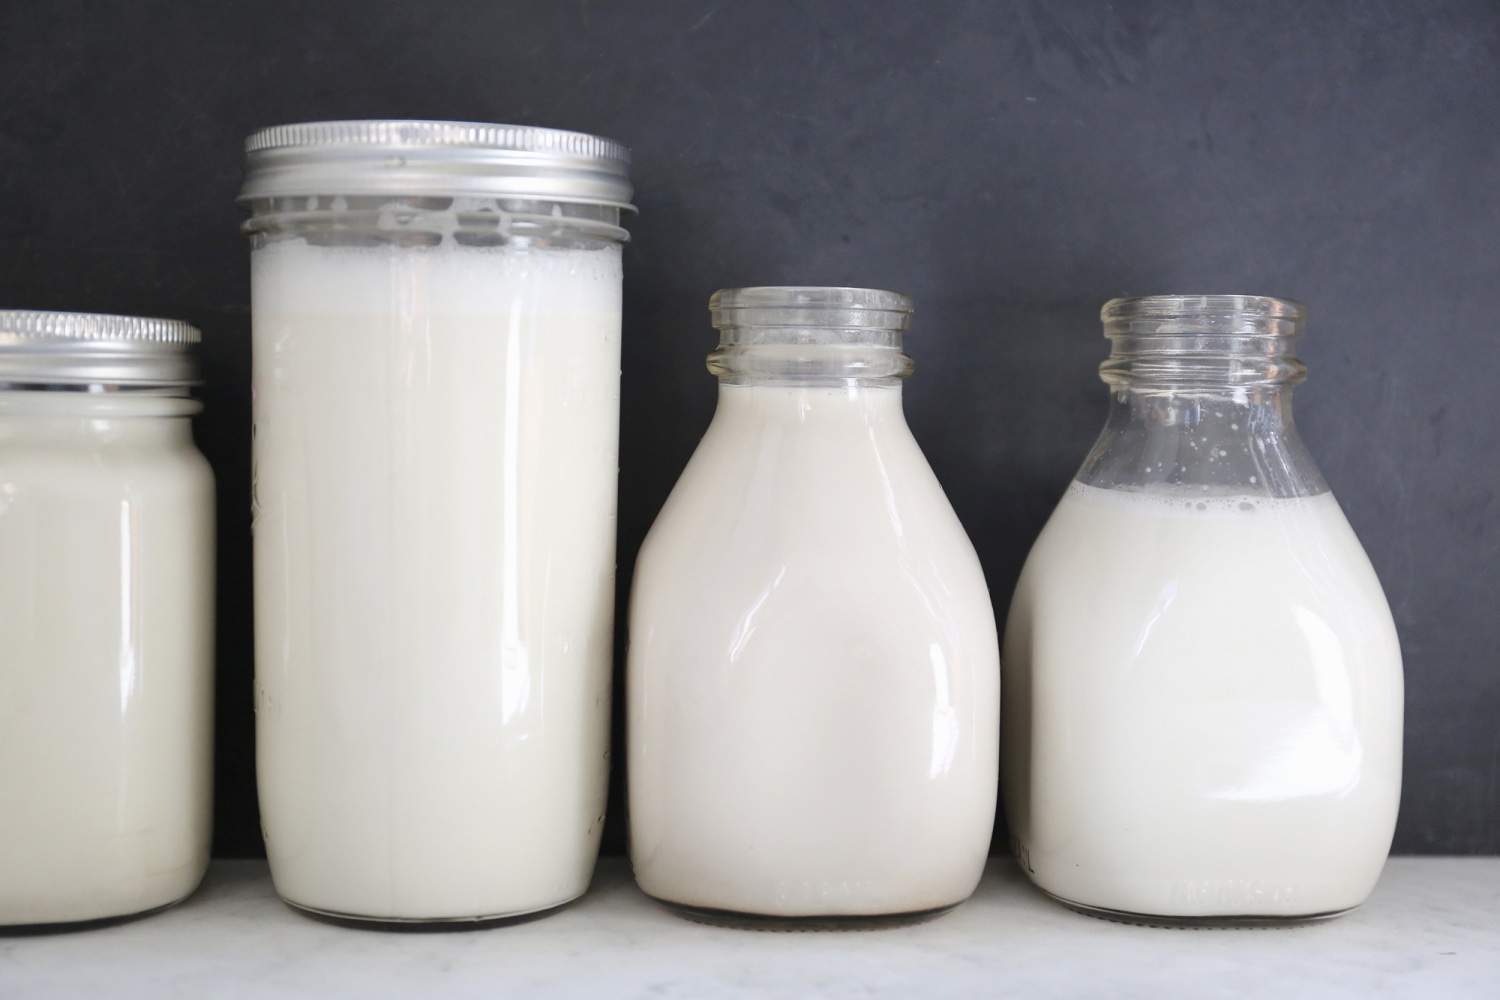 Plant-based milk vs. cow's milk: What's the difference?